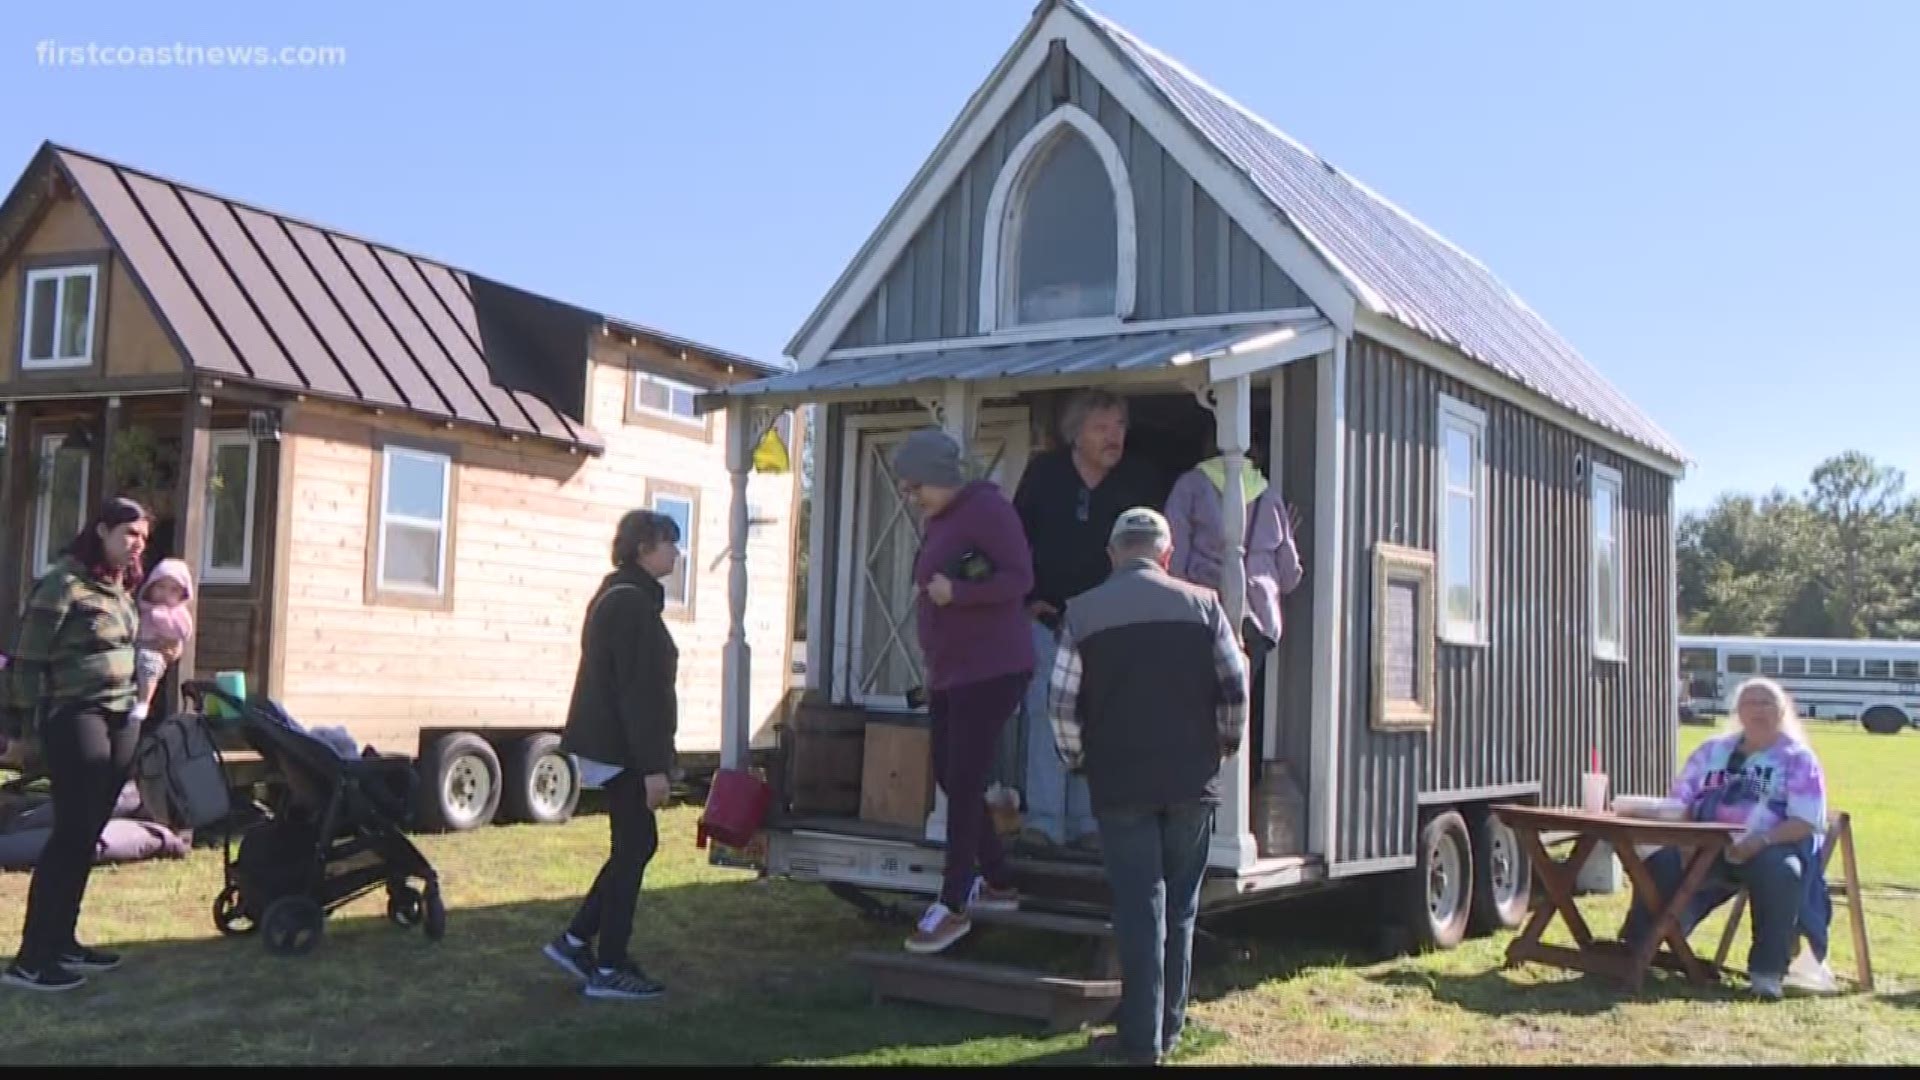 The 3rd annual Florida Tiny House and Music Festival is underway this weekend in St. Johns County.